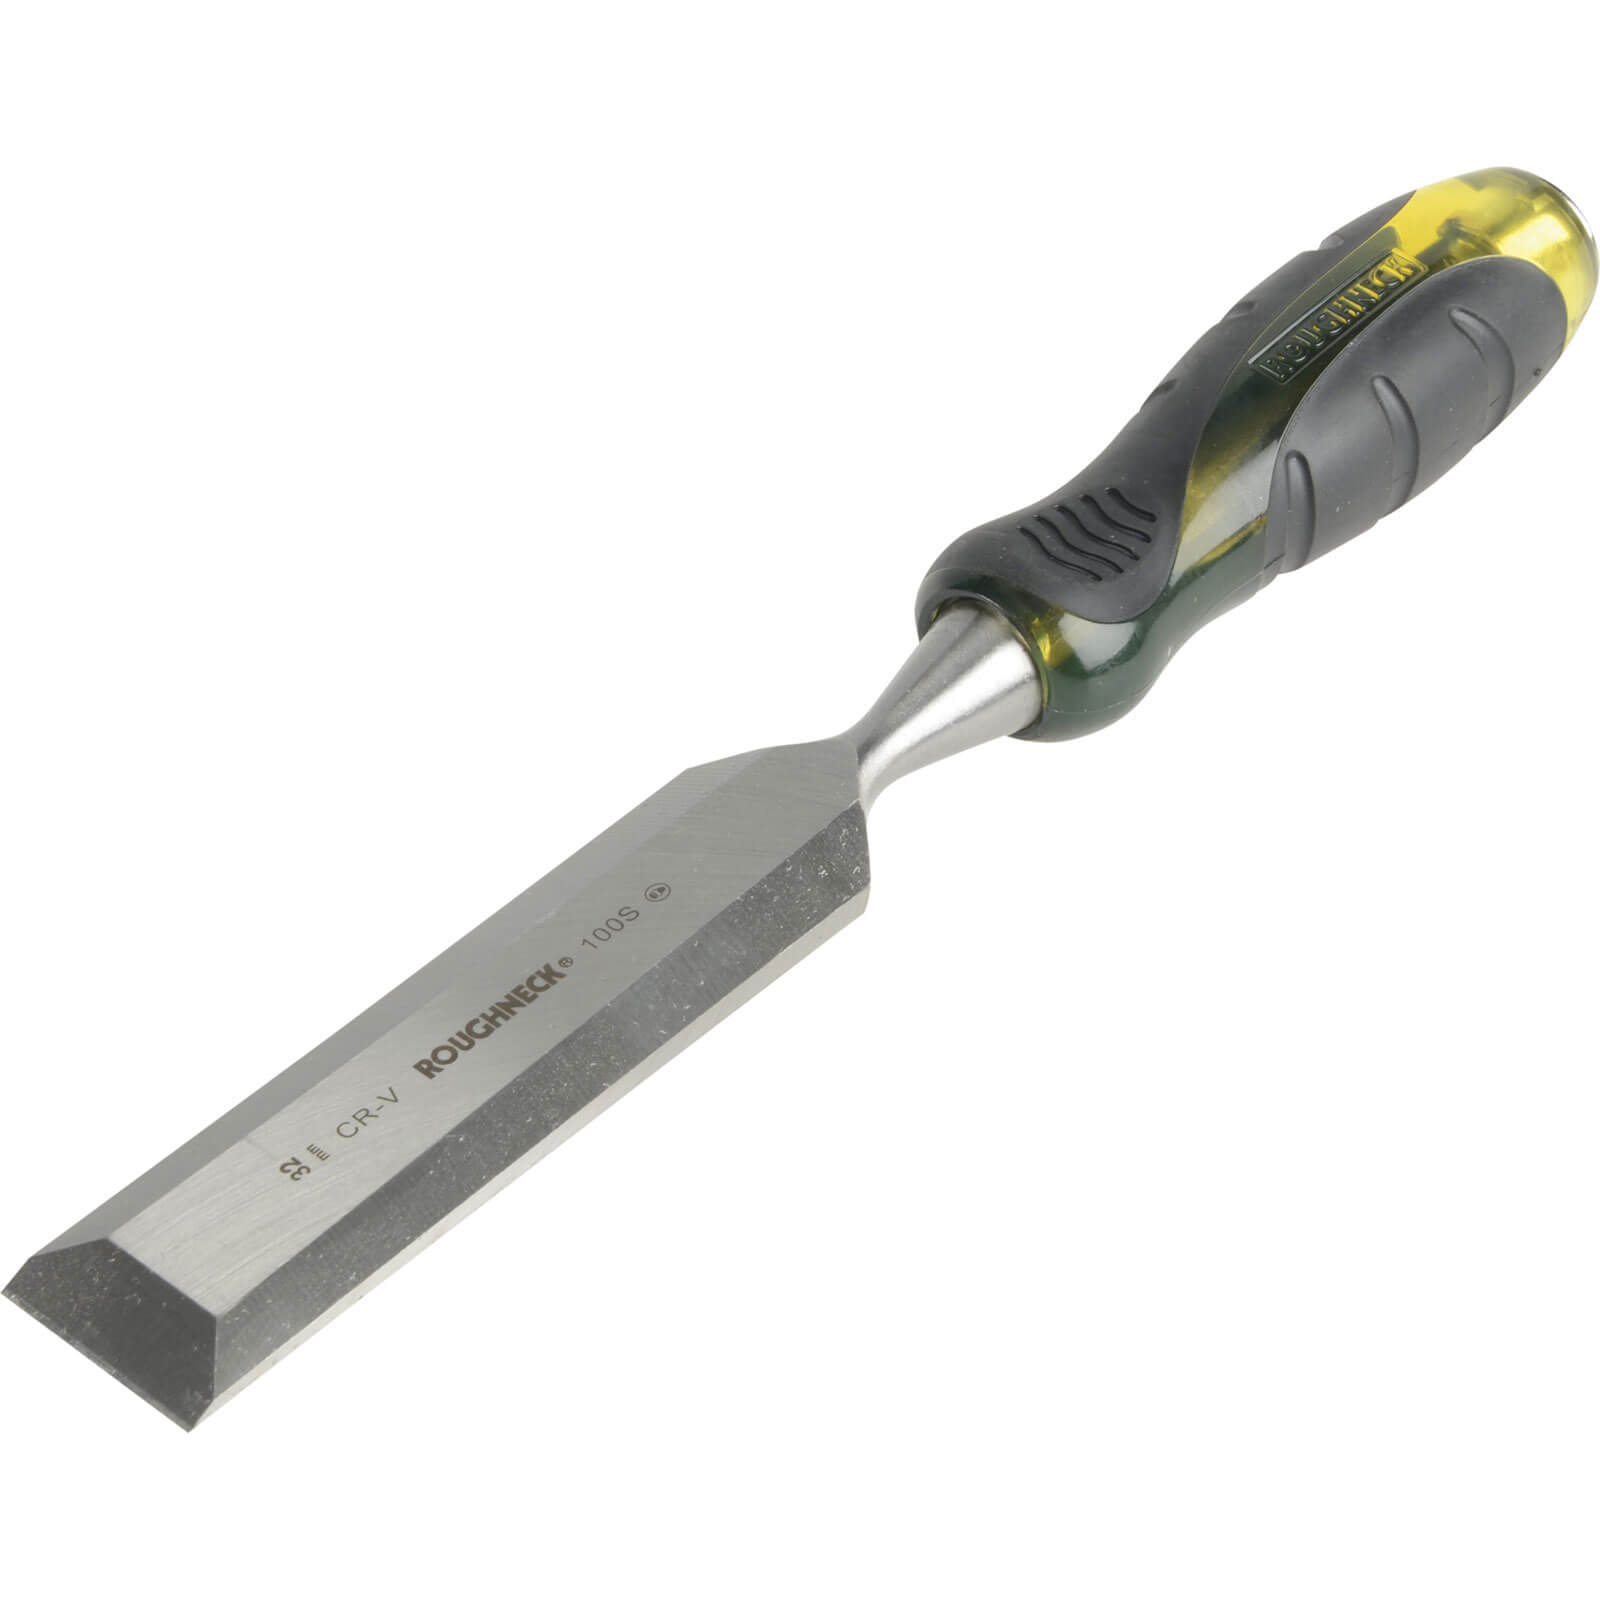 Image of Roughneck Professional Bevel Edge Wood Chisel 32mm